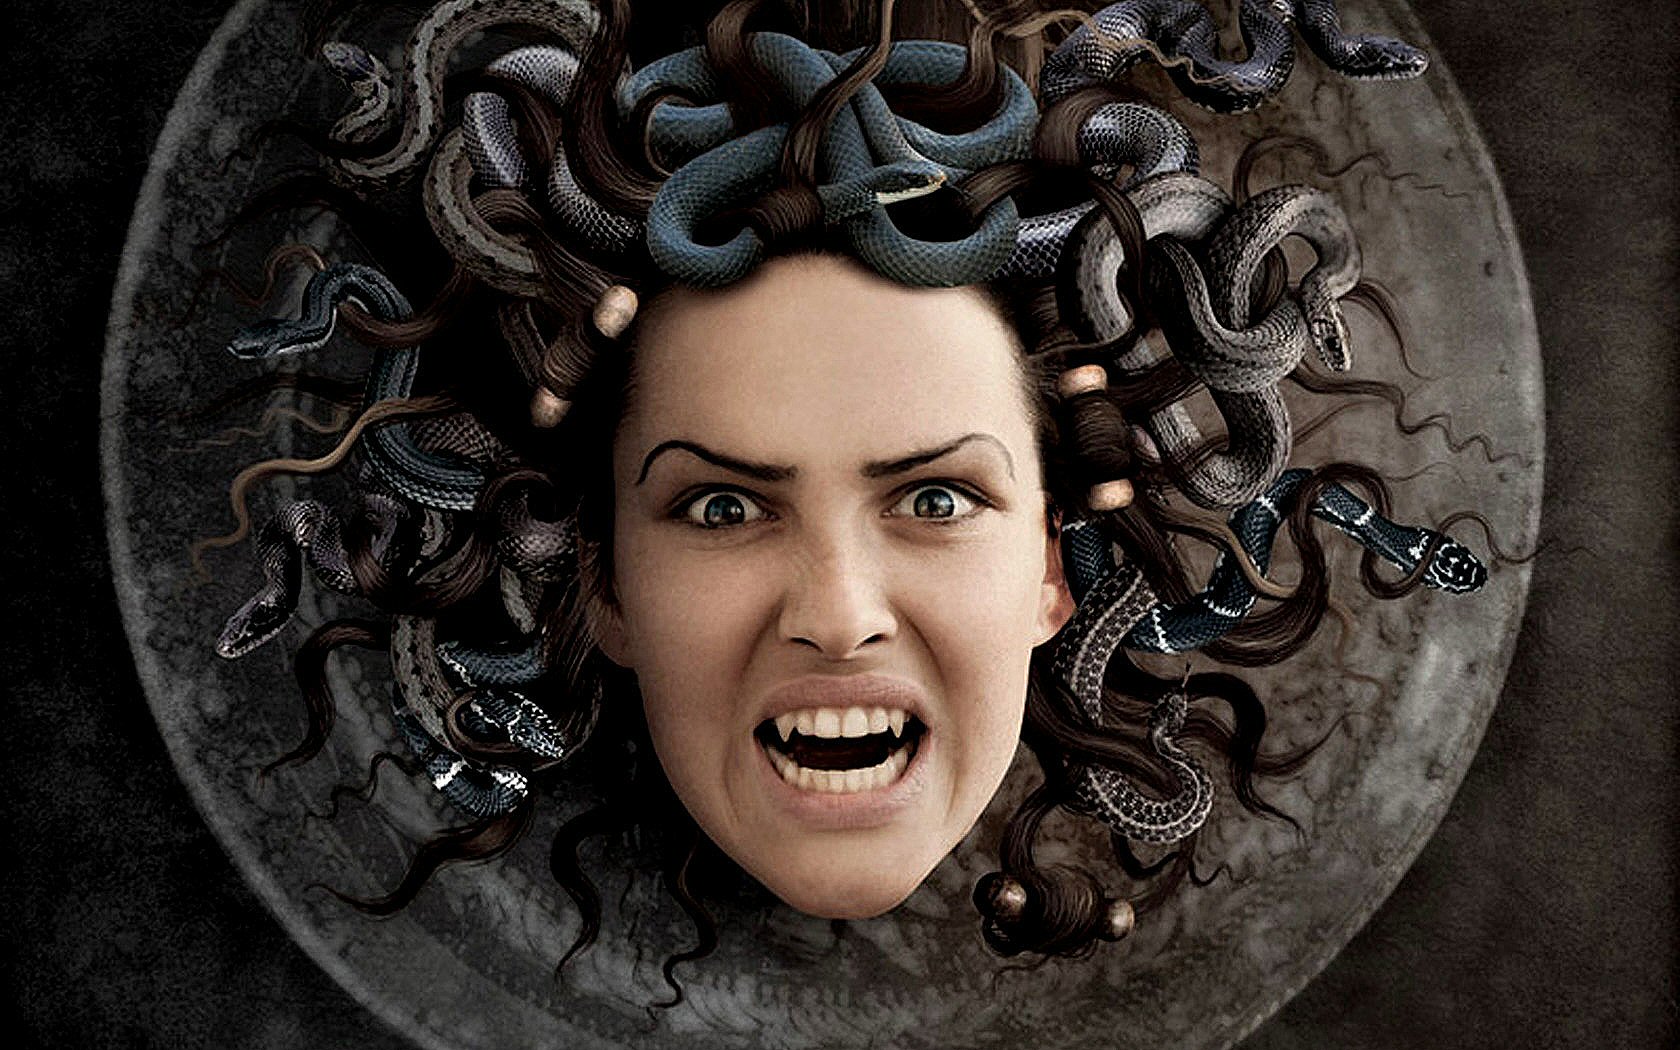 Medusa Wallpaper and Background Image 1680x1050 ID209441 1680x1050